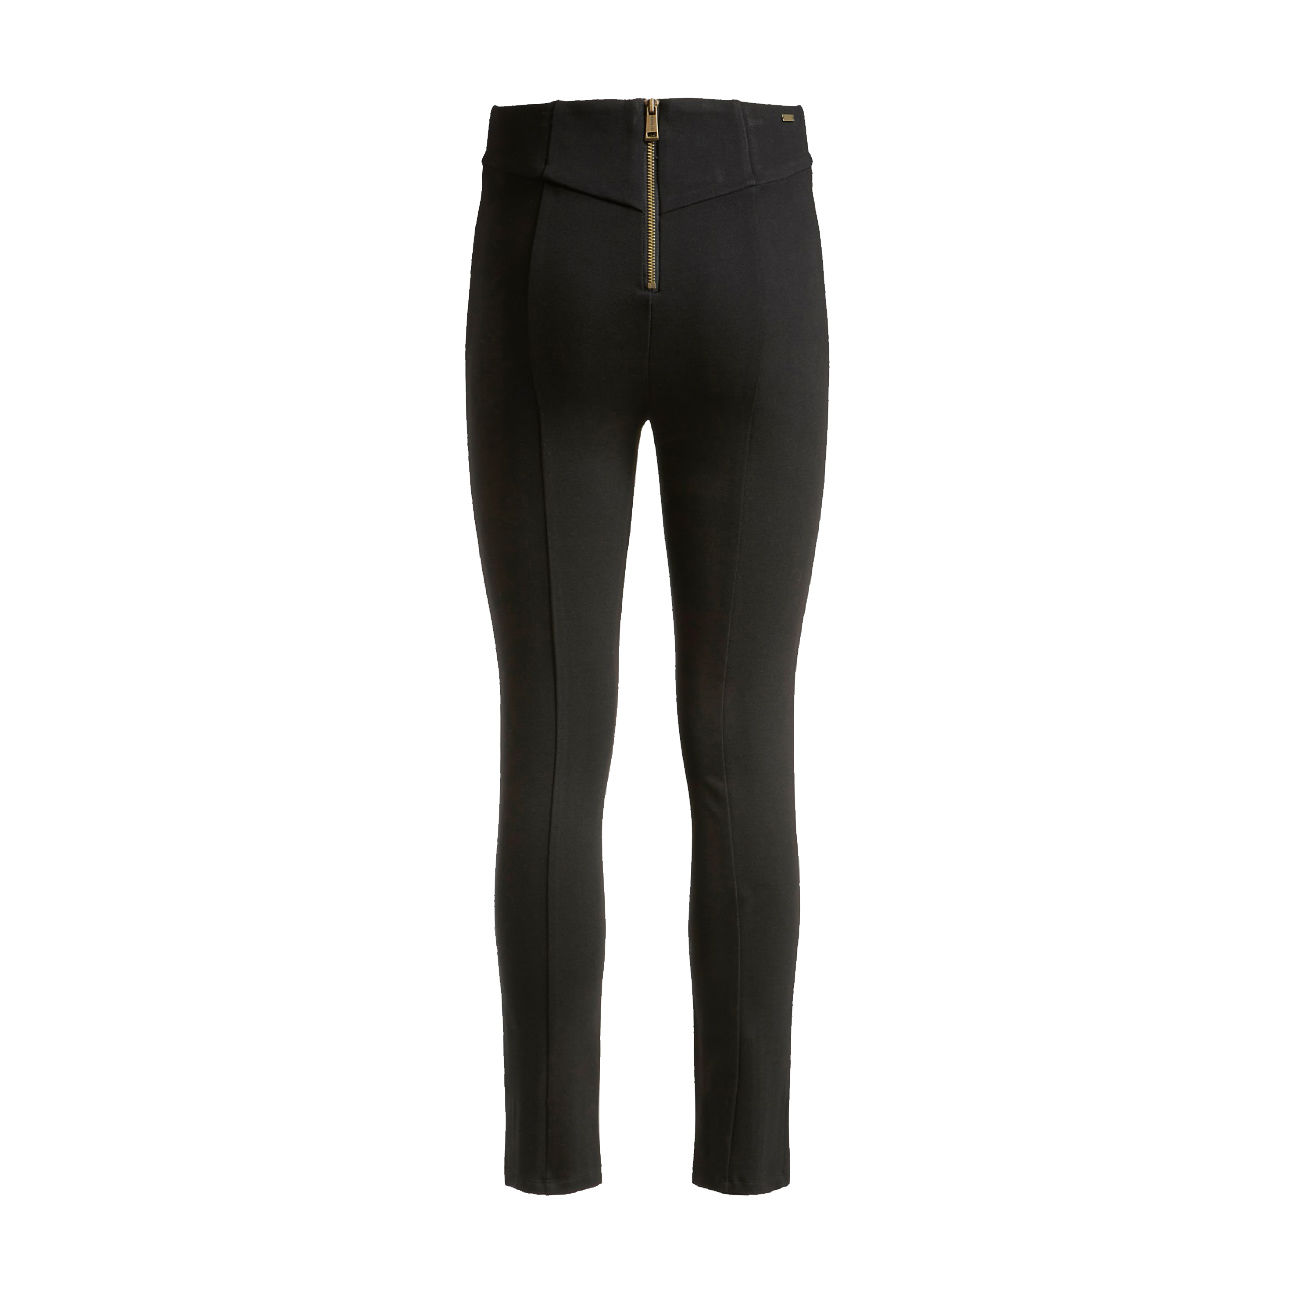 GUESS ELEONORA LEGGINGS WITH METAL BUTTONS Woman Jet black